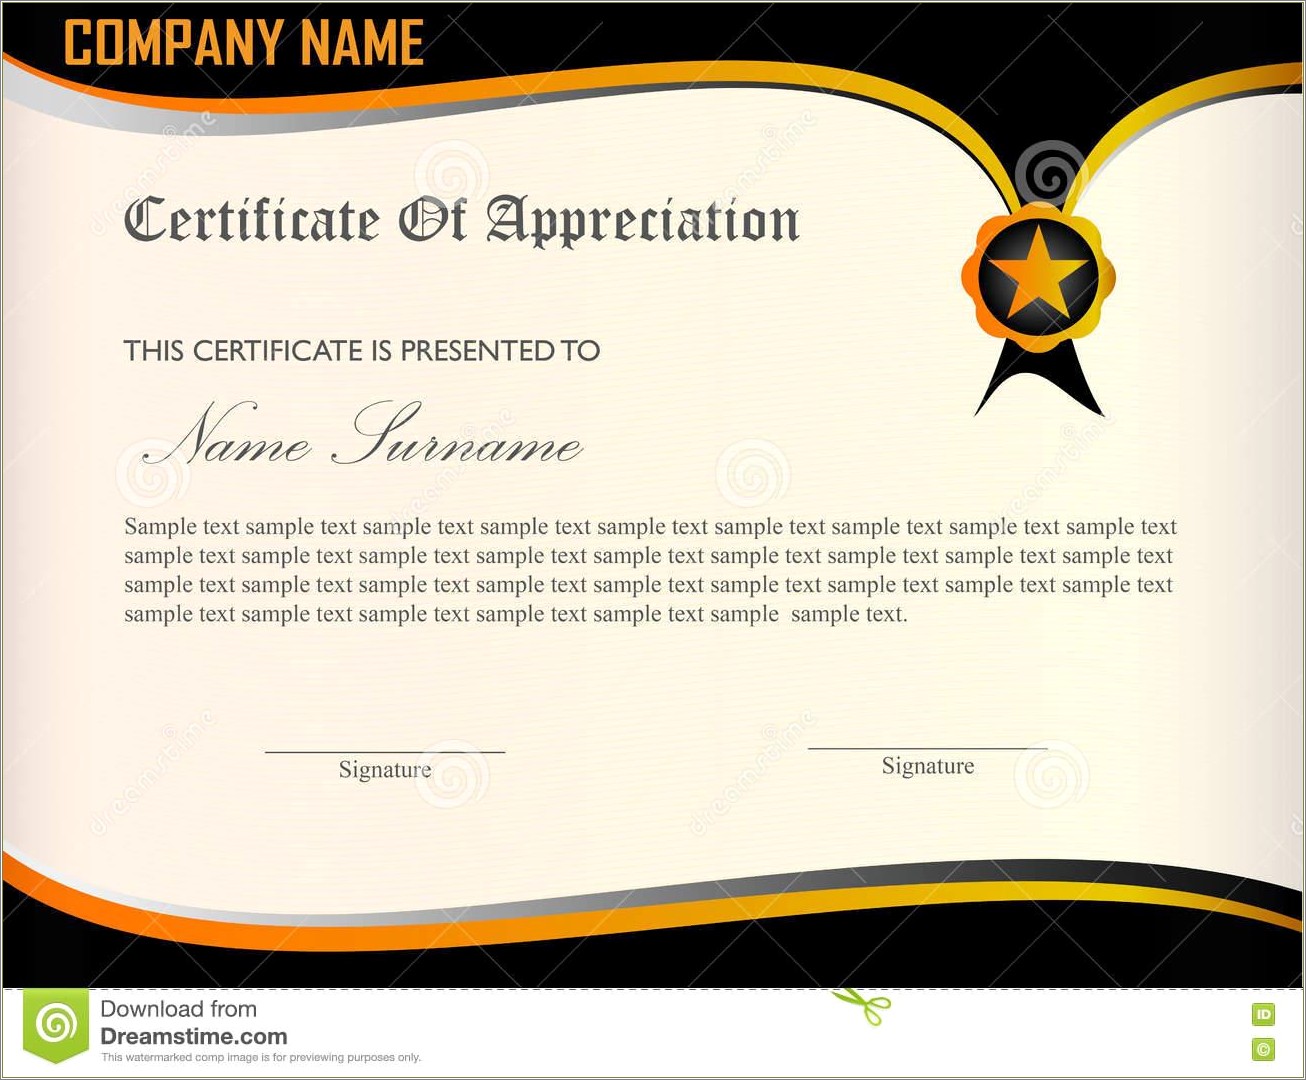 free-certificate-of-appreciation-template-powerpoint-resume-example